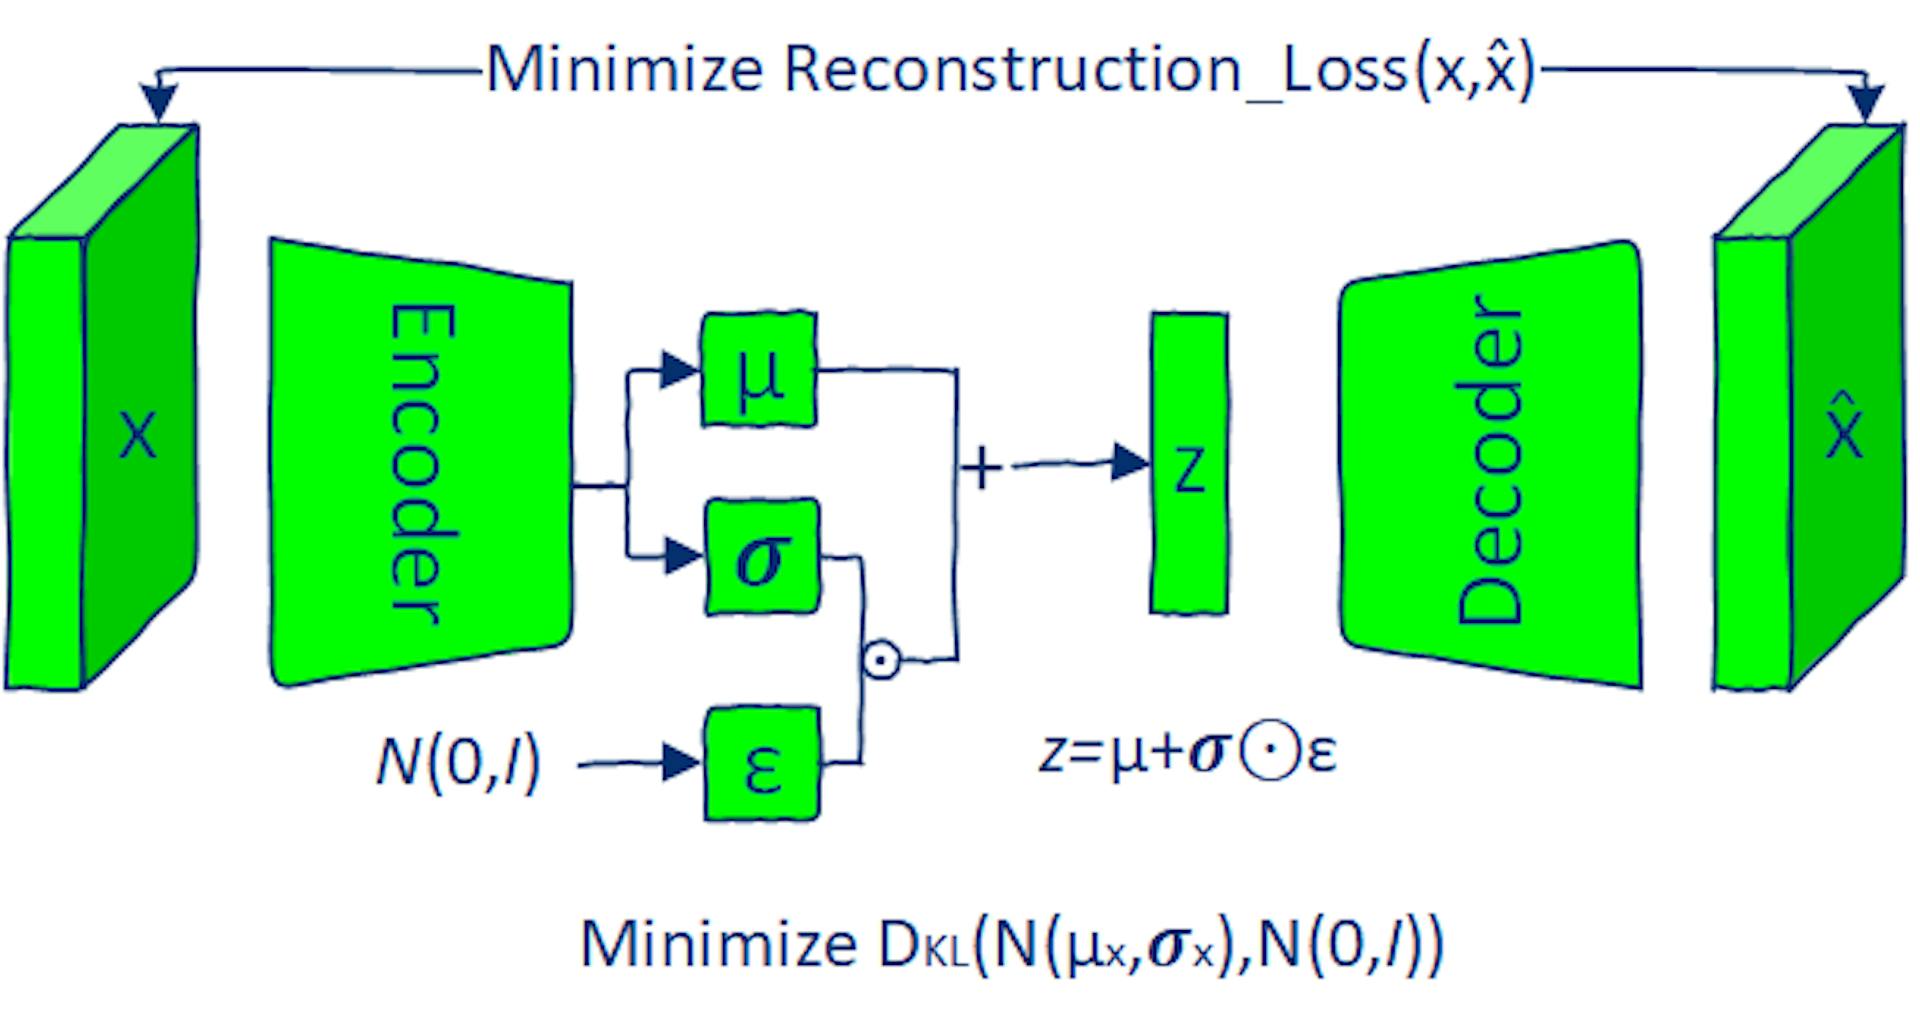 VAE model is trained by minimizing reconstruction loss and KL-divergence loss